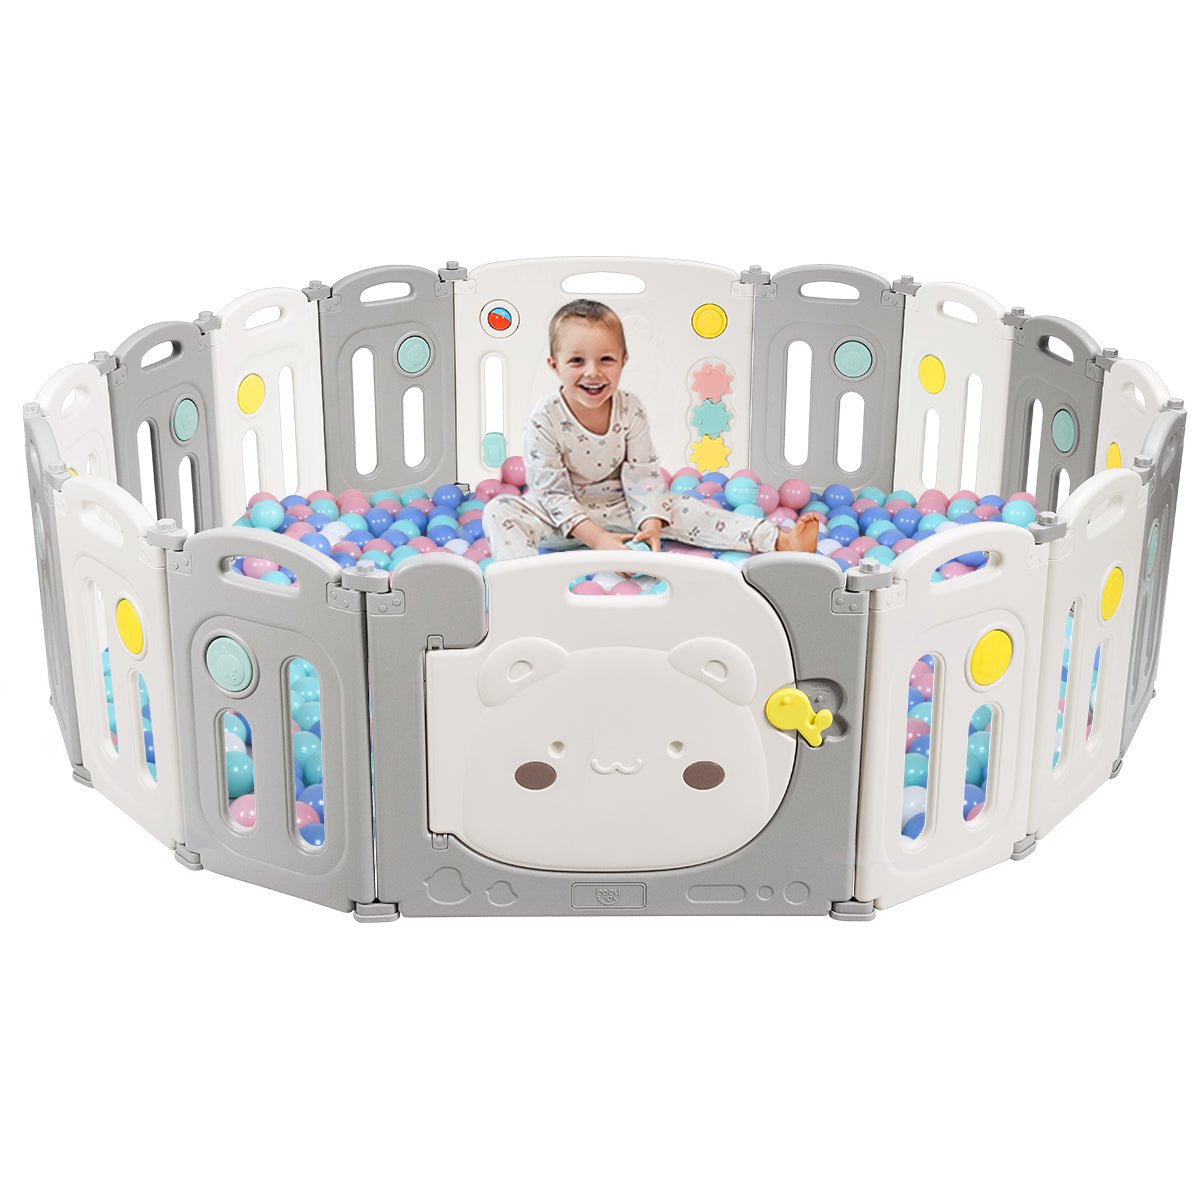 16-Panel Foldable Baby Playpen with Safety Lock and Non-slip Foot Mats